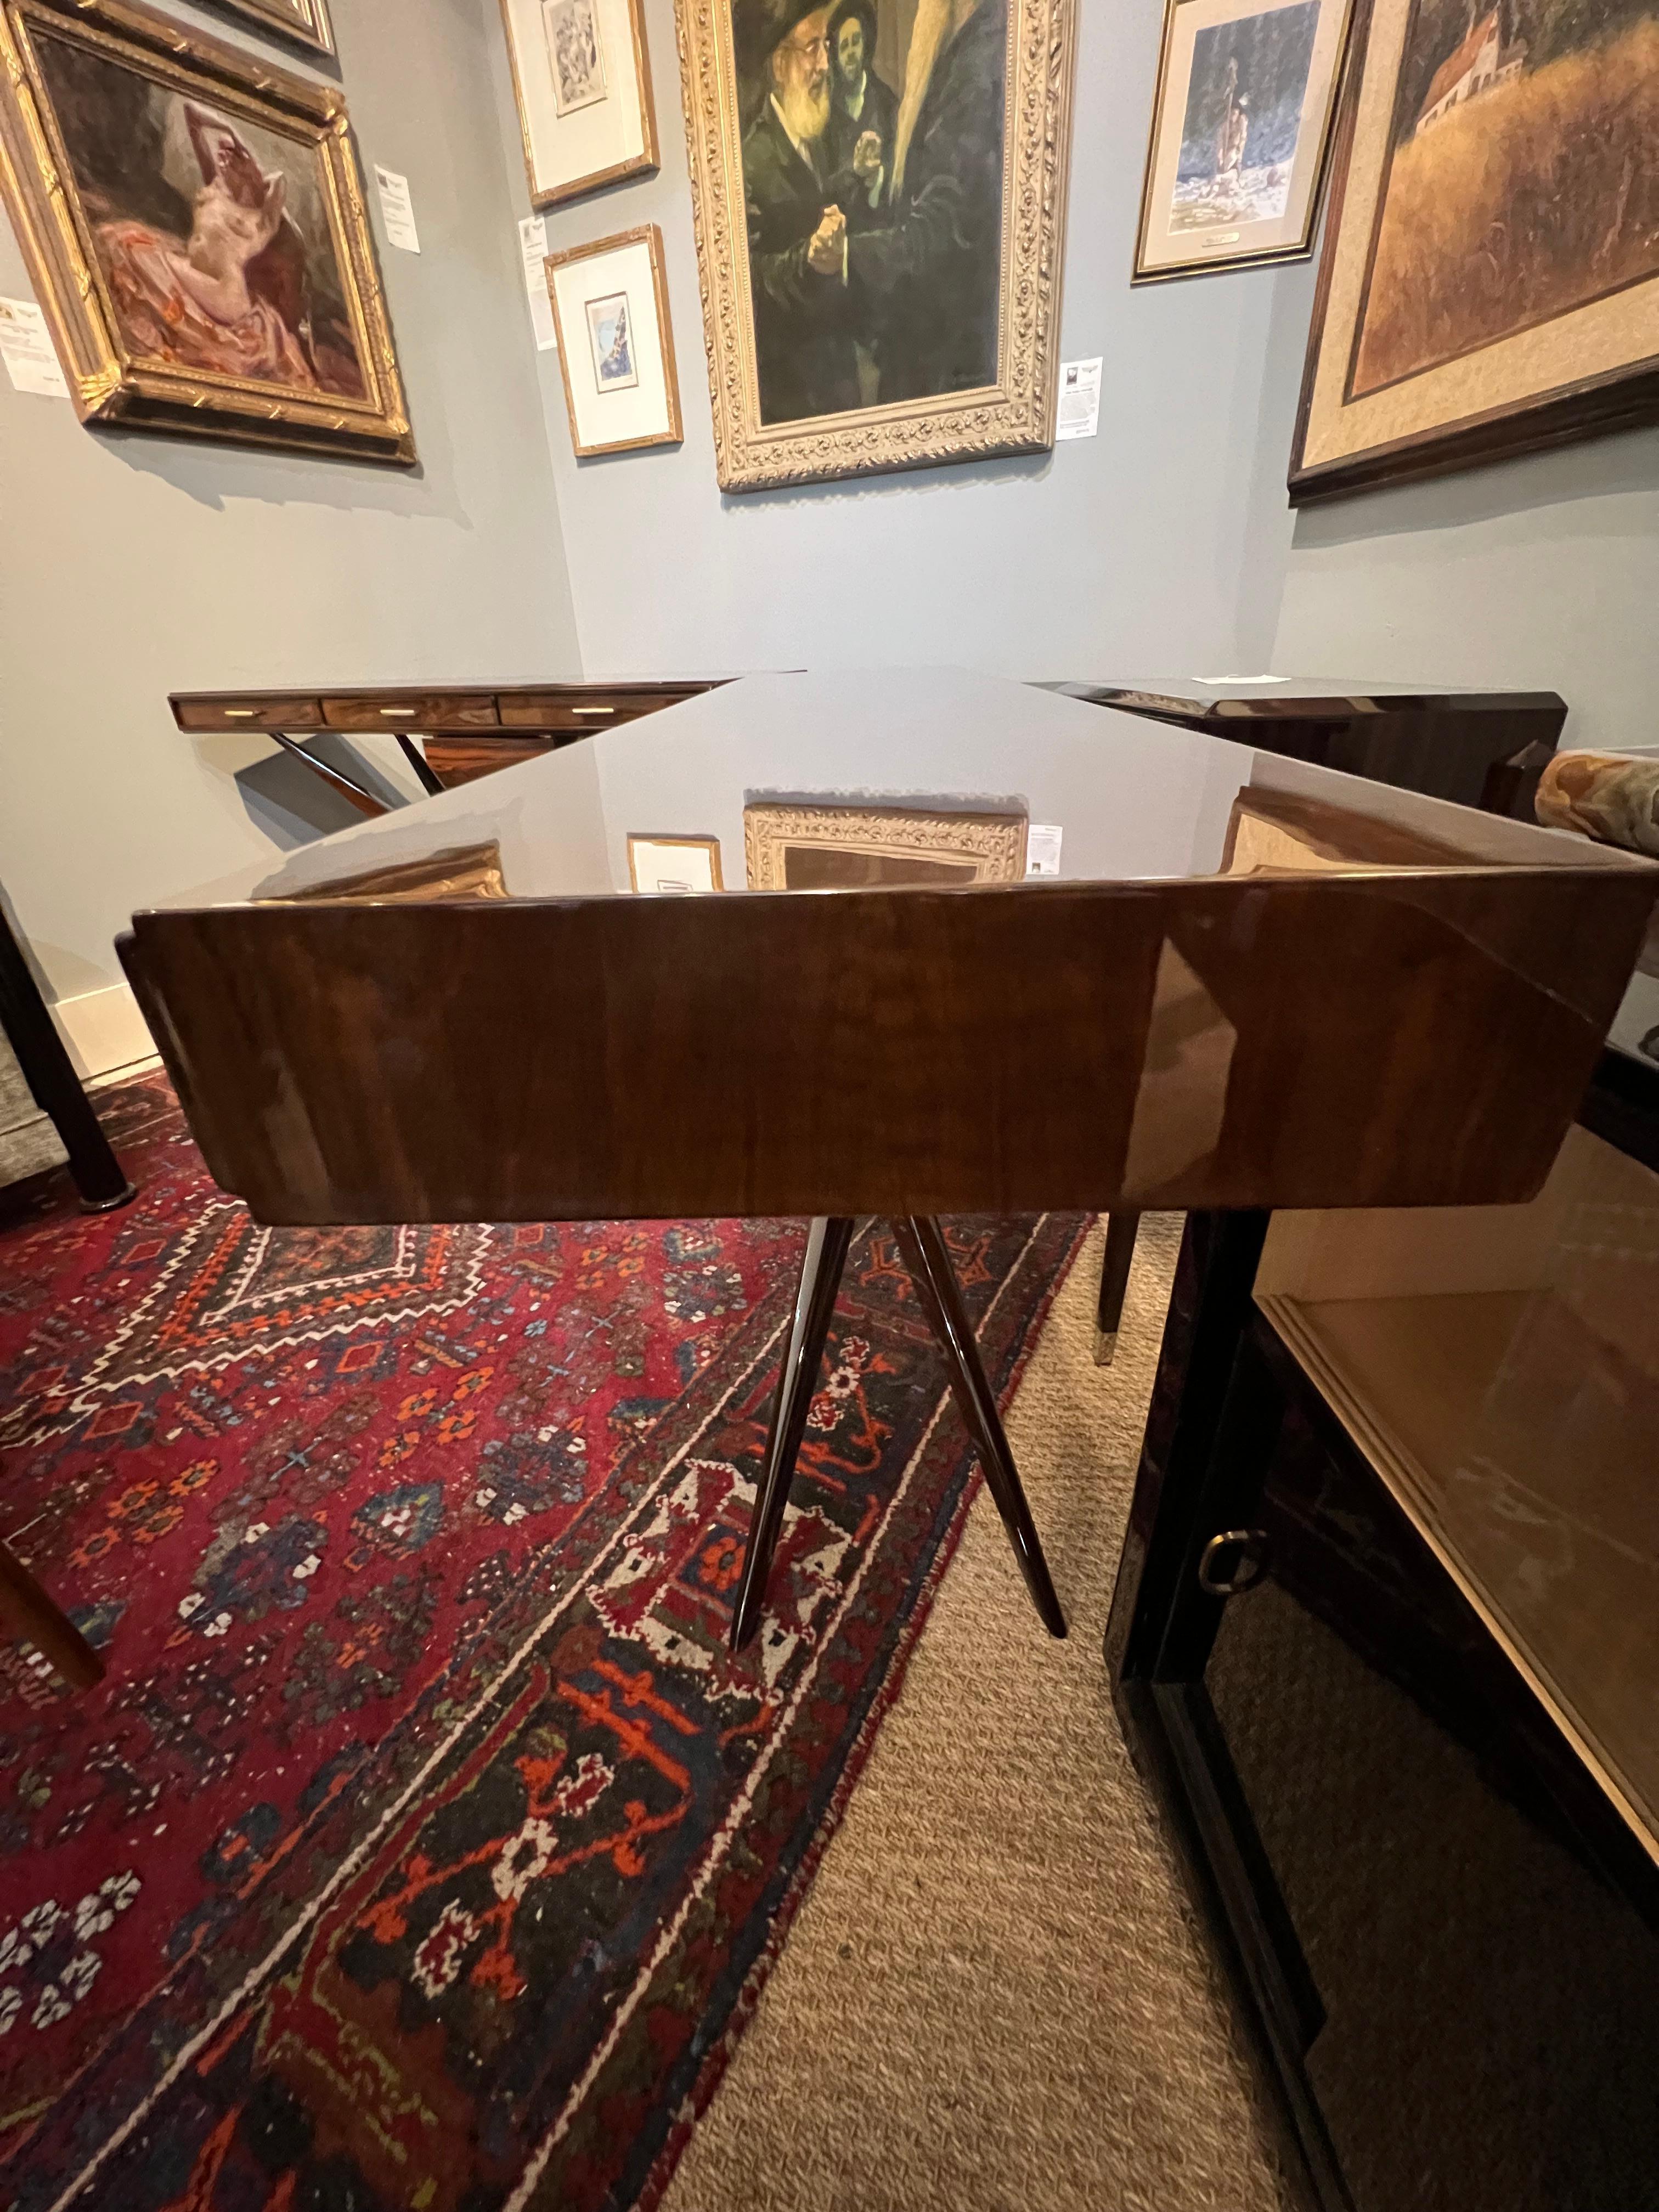 Console is made out of high quality walnut wood. Has 3 slim drawers with chrome handles. Four elongated legs are connected in the middle with decorative metal element, creating X shape.

Condition is perfect, restored
Continental, c. 1960s
Measures: